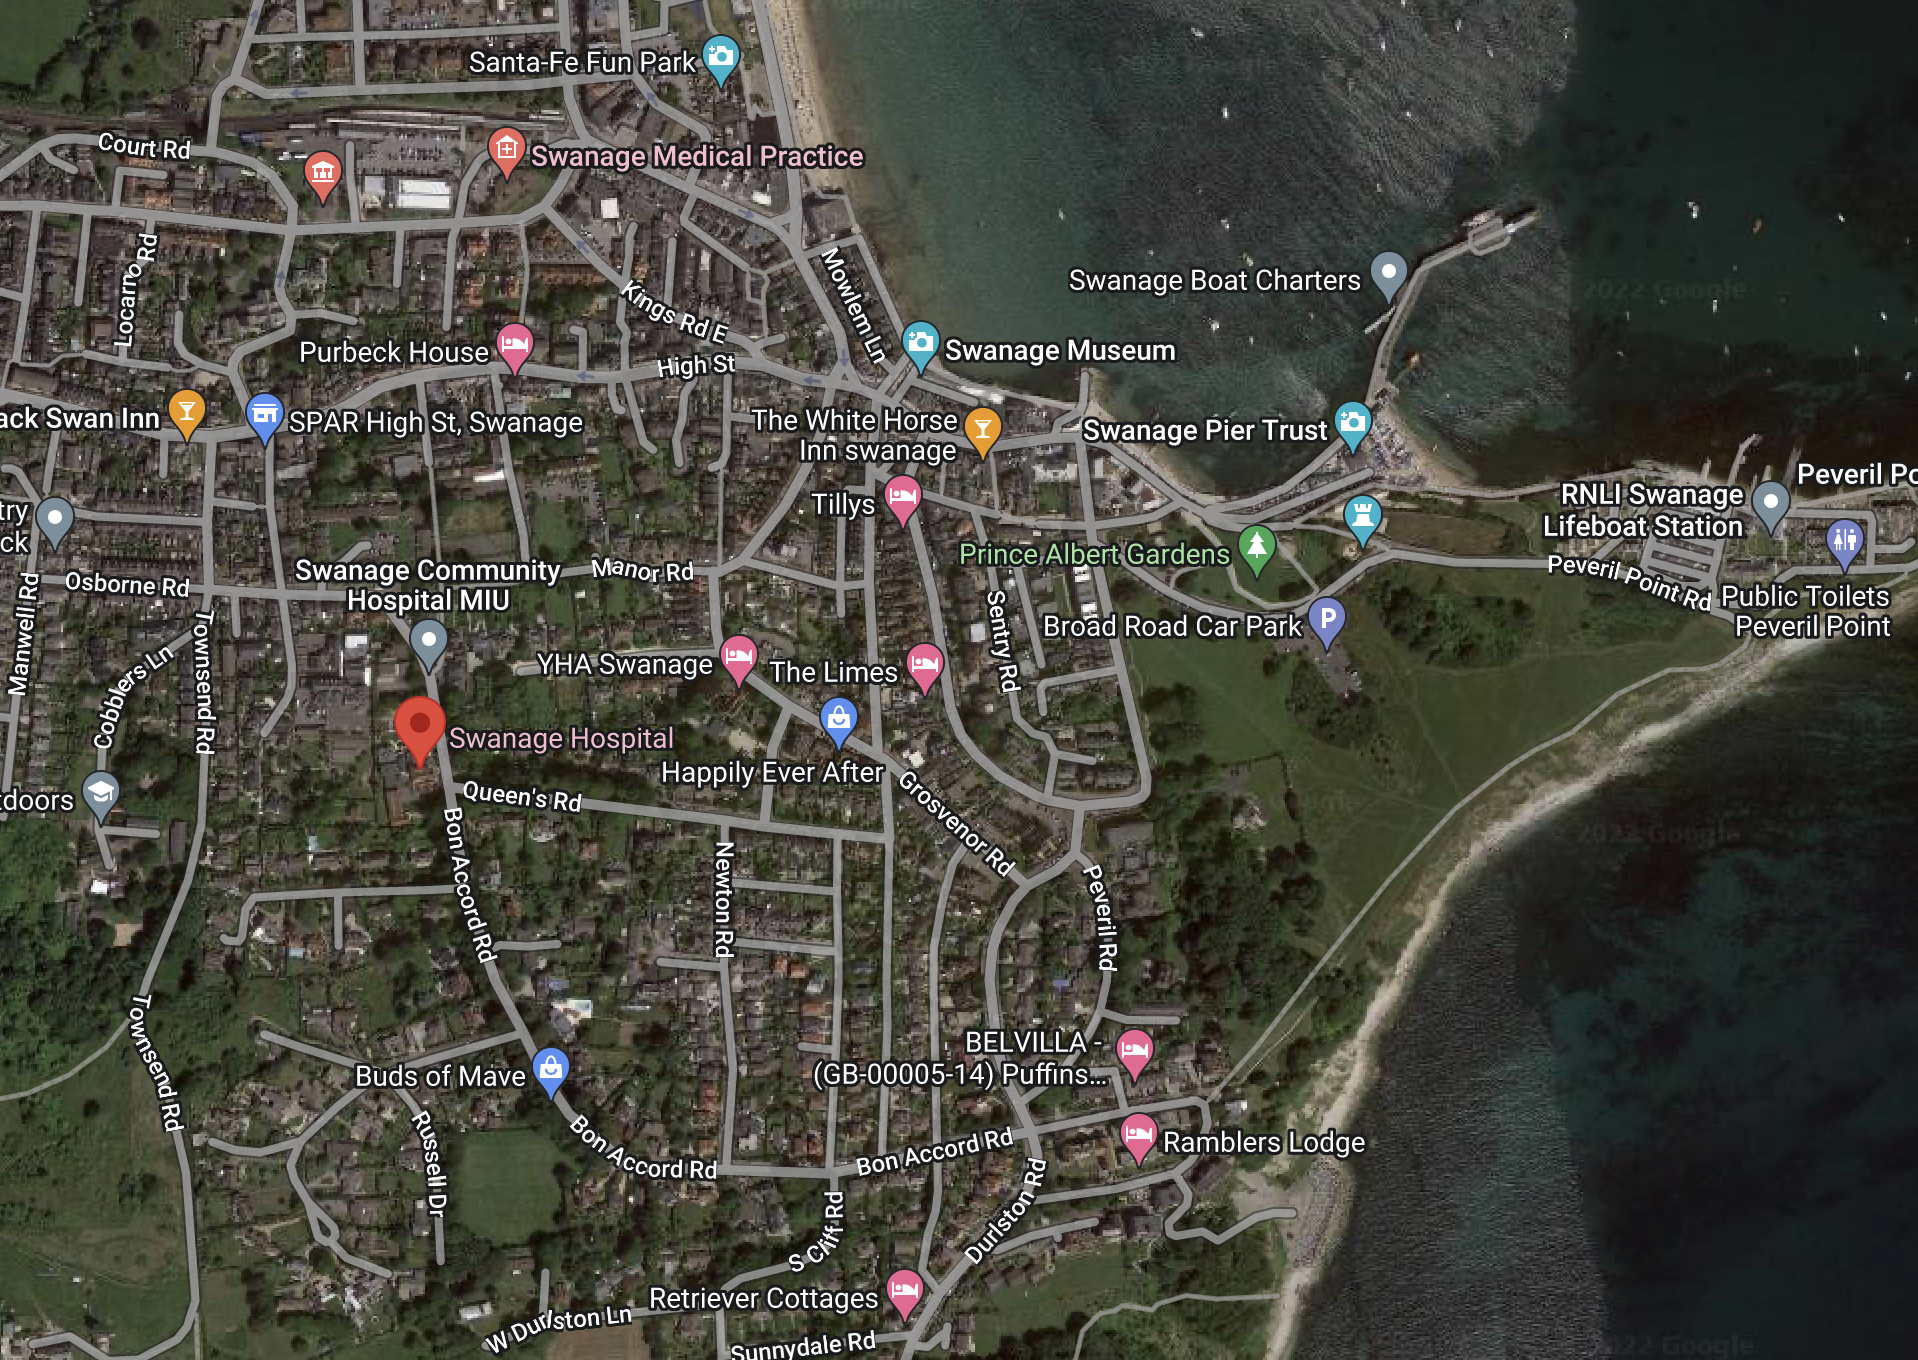 Google map screenshot showing the location of Swanage Community hospital